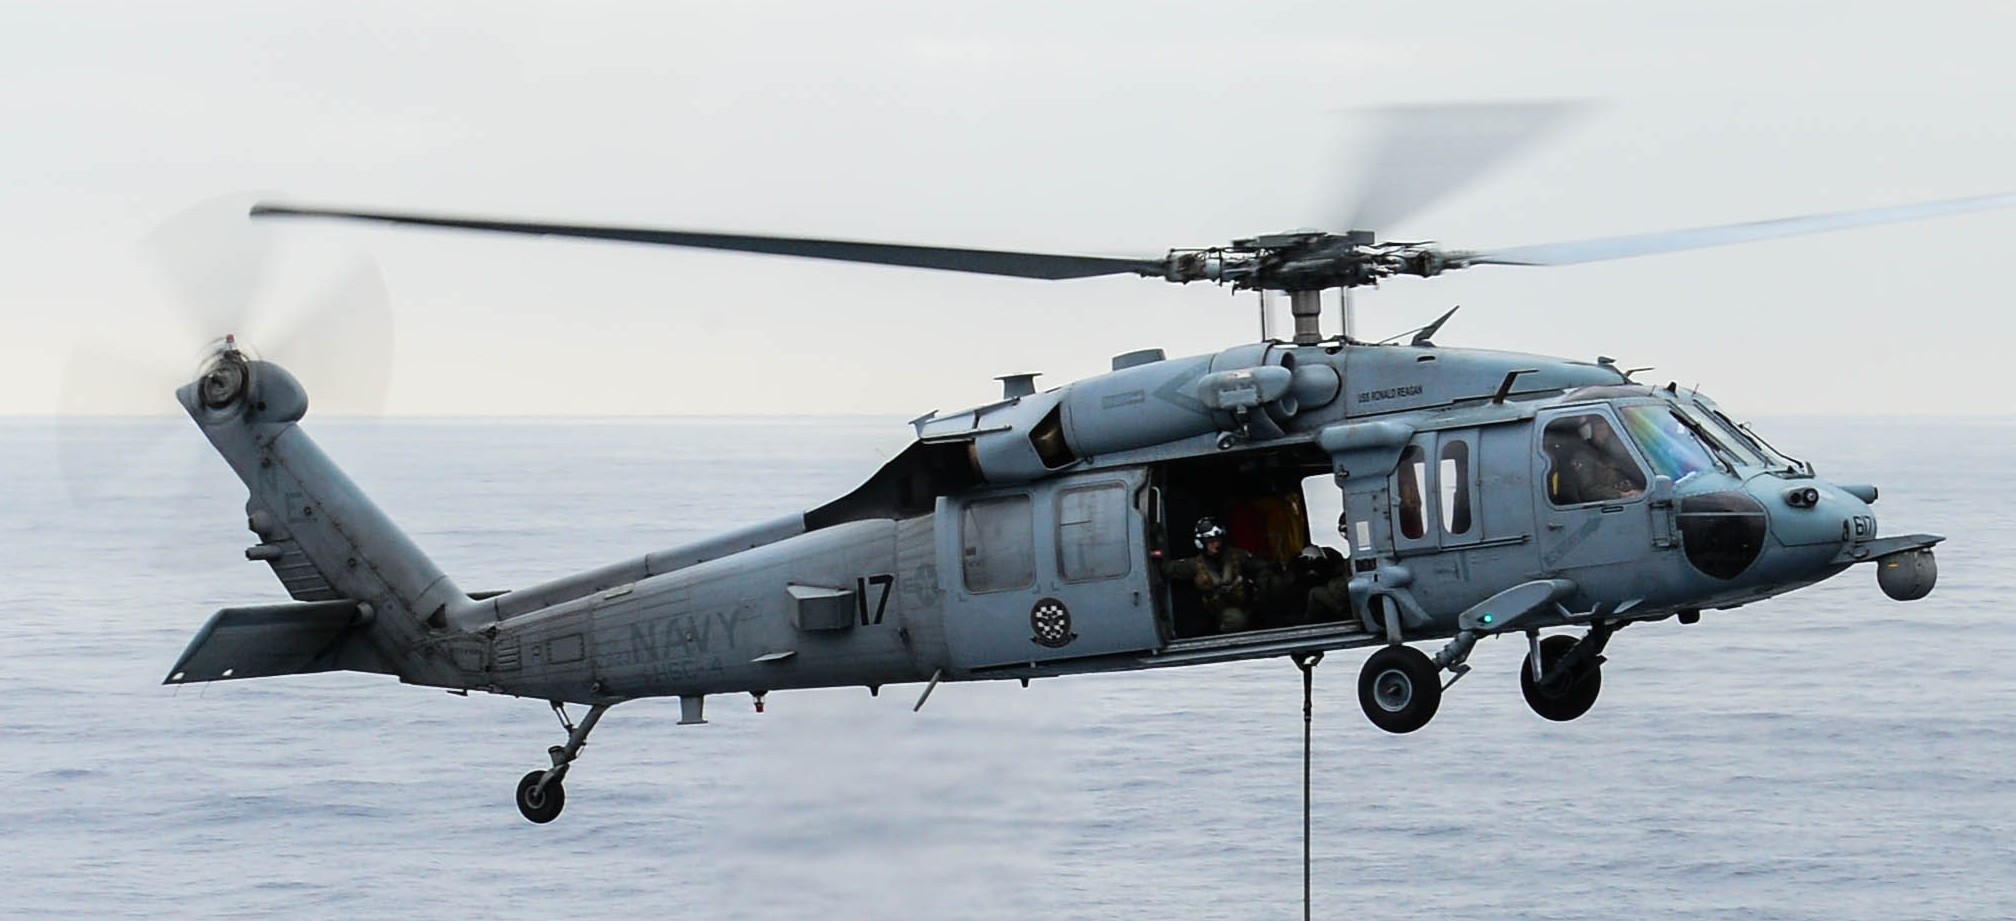 hsc-4 black knights helicopter sea combat squadron us navy mh-60s seahawk 2014 41